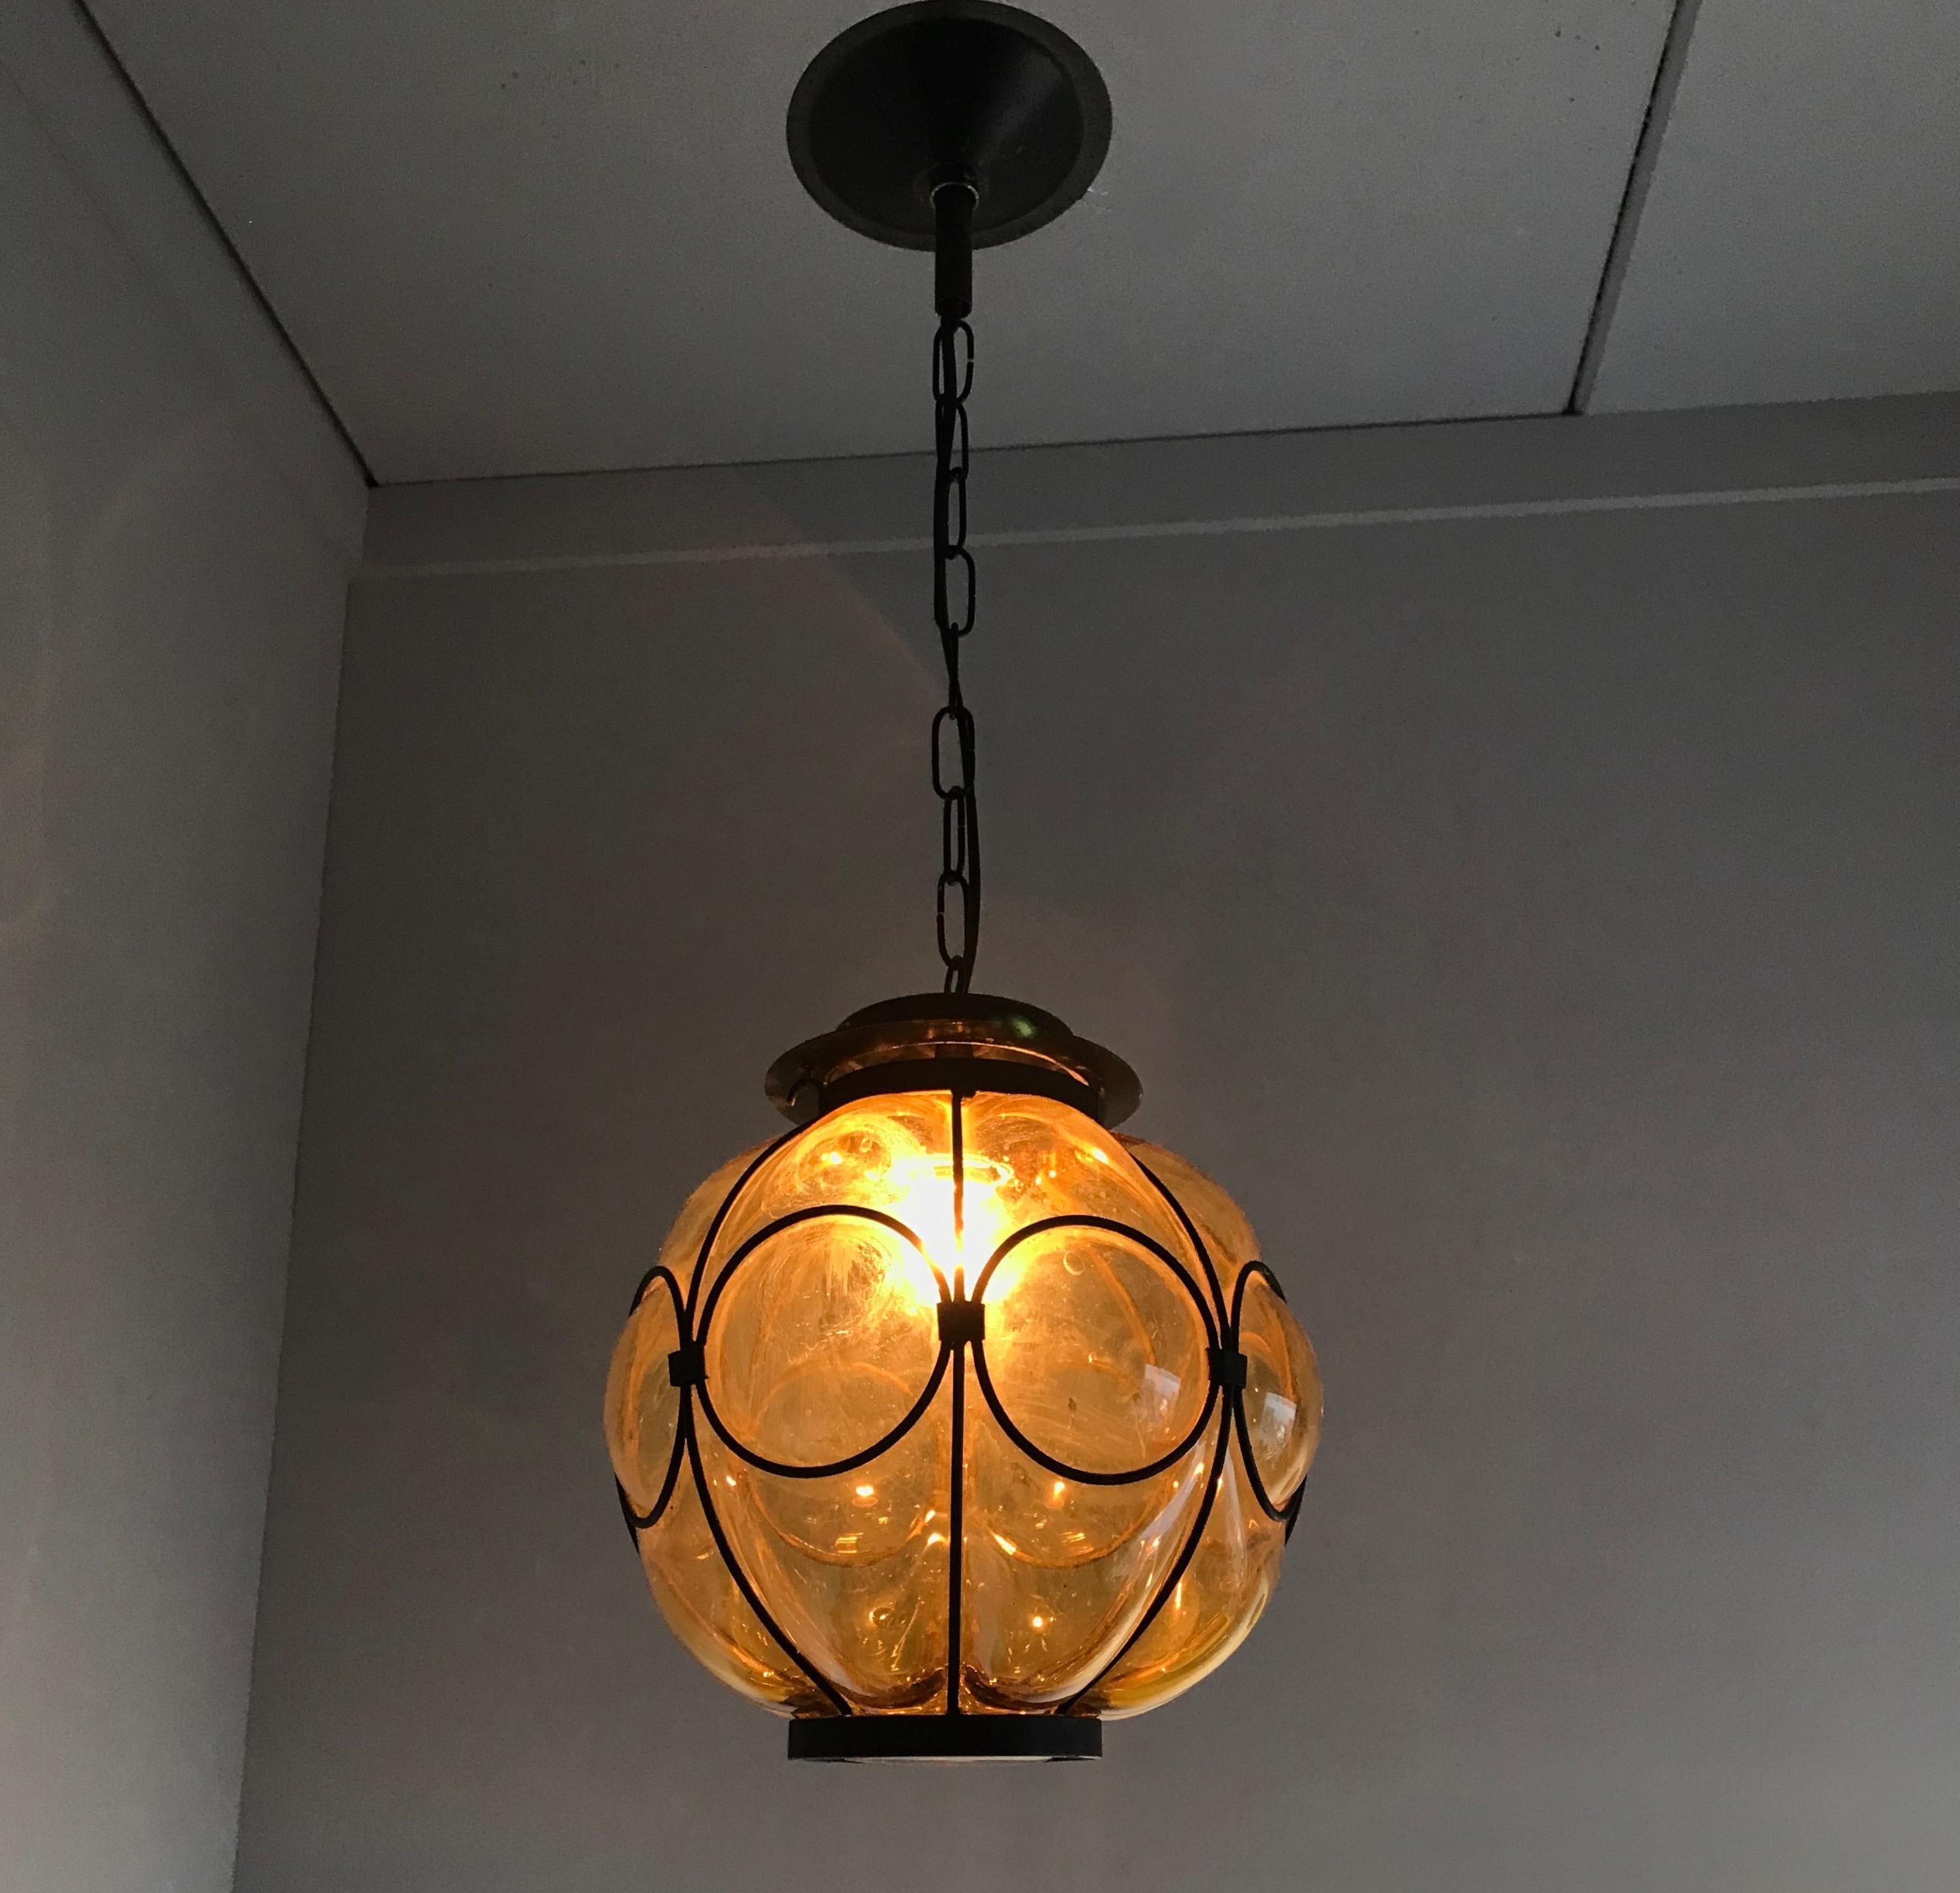 Timeless, circular design Venetian pendant.

This rare, midcentury pendant is mouthblown into a perfectly symmetrical and circular design frame. The thick transparent glass below the strong black metal gallery makes it an absolute joy to look at,